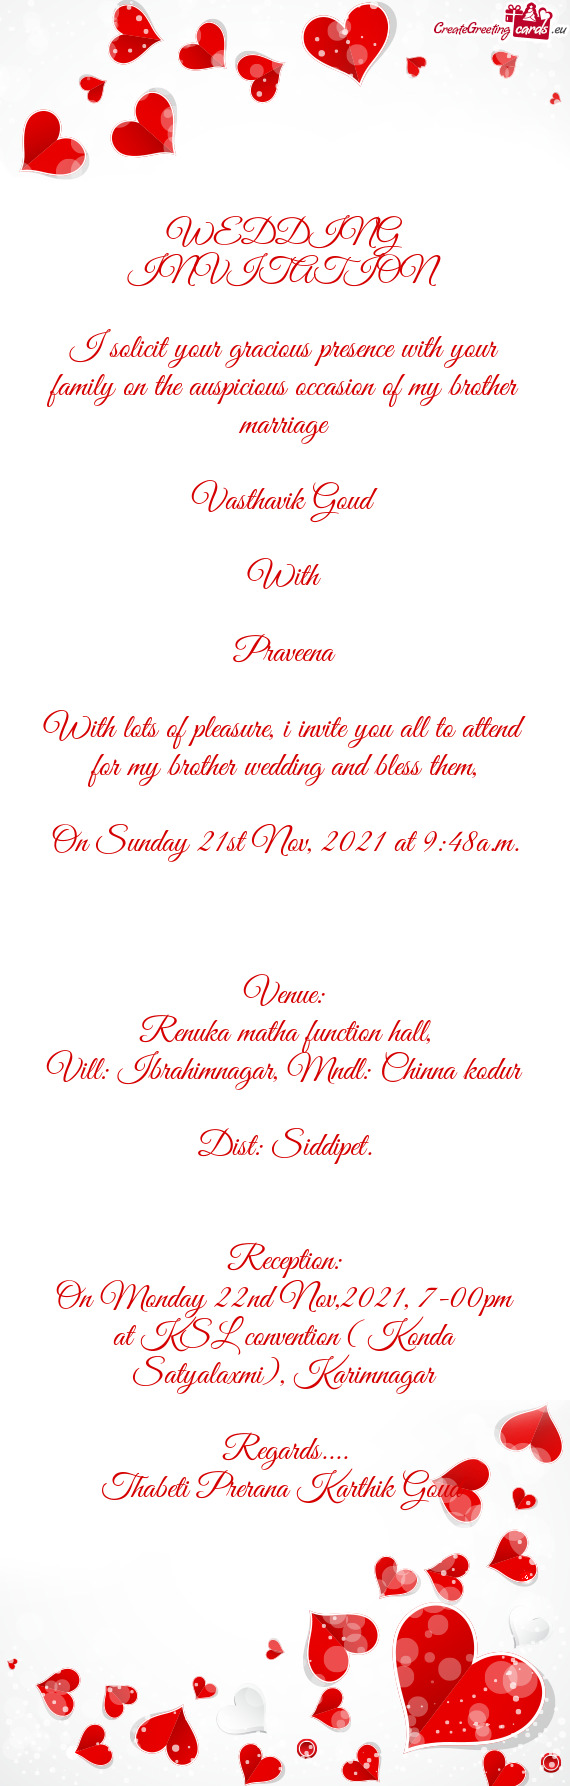 With lots of pleasure, i invite you all to attend for my brother wedding and bless them